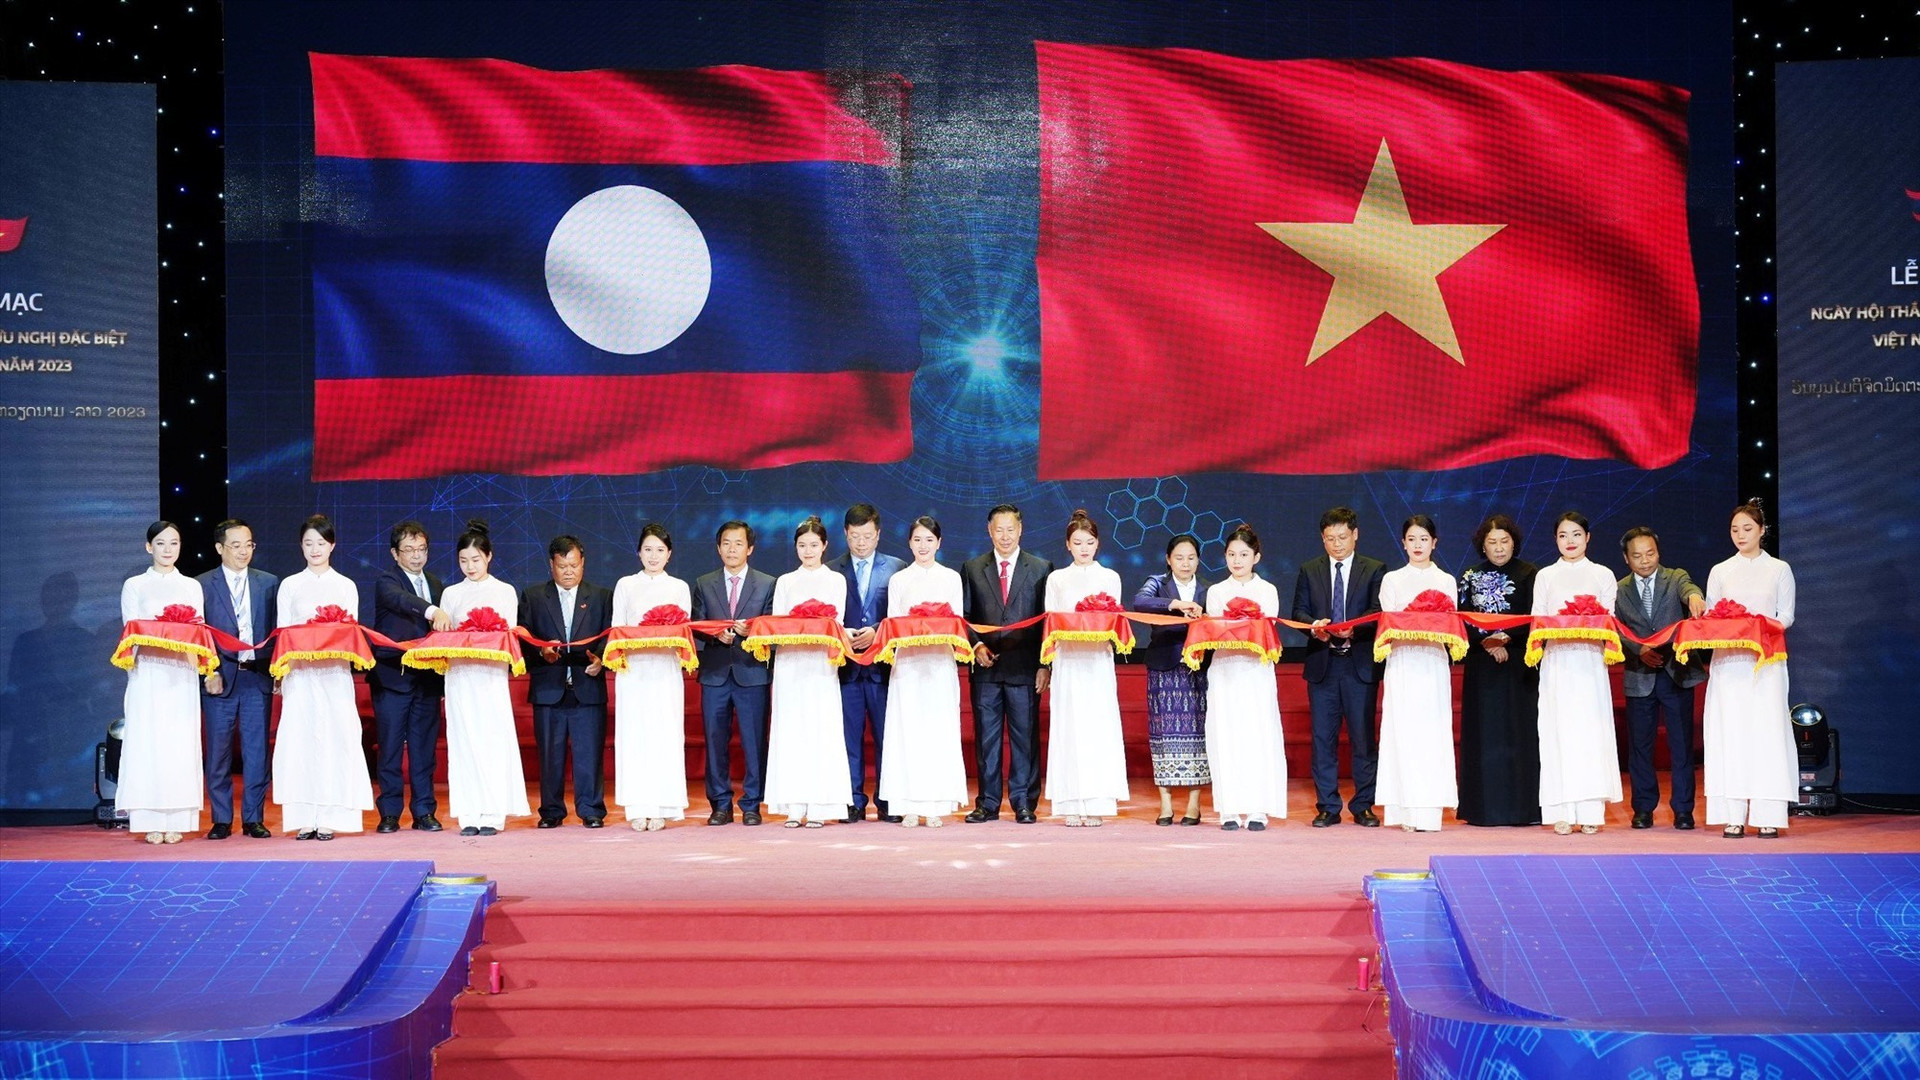 The opening ceremony of the Vietnam - Laos Special Friendship Festival 2023